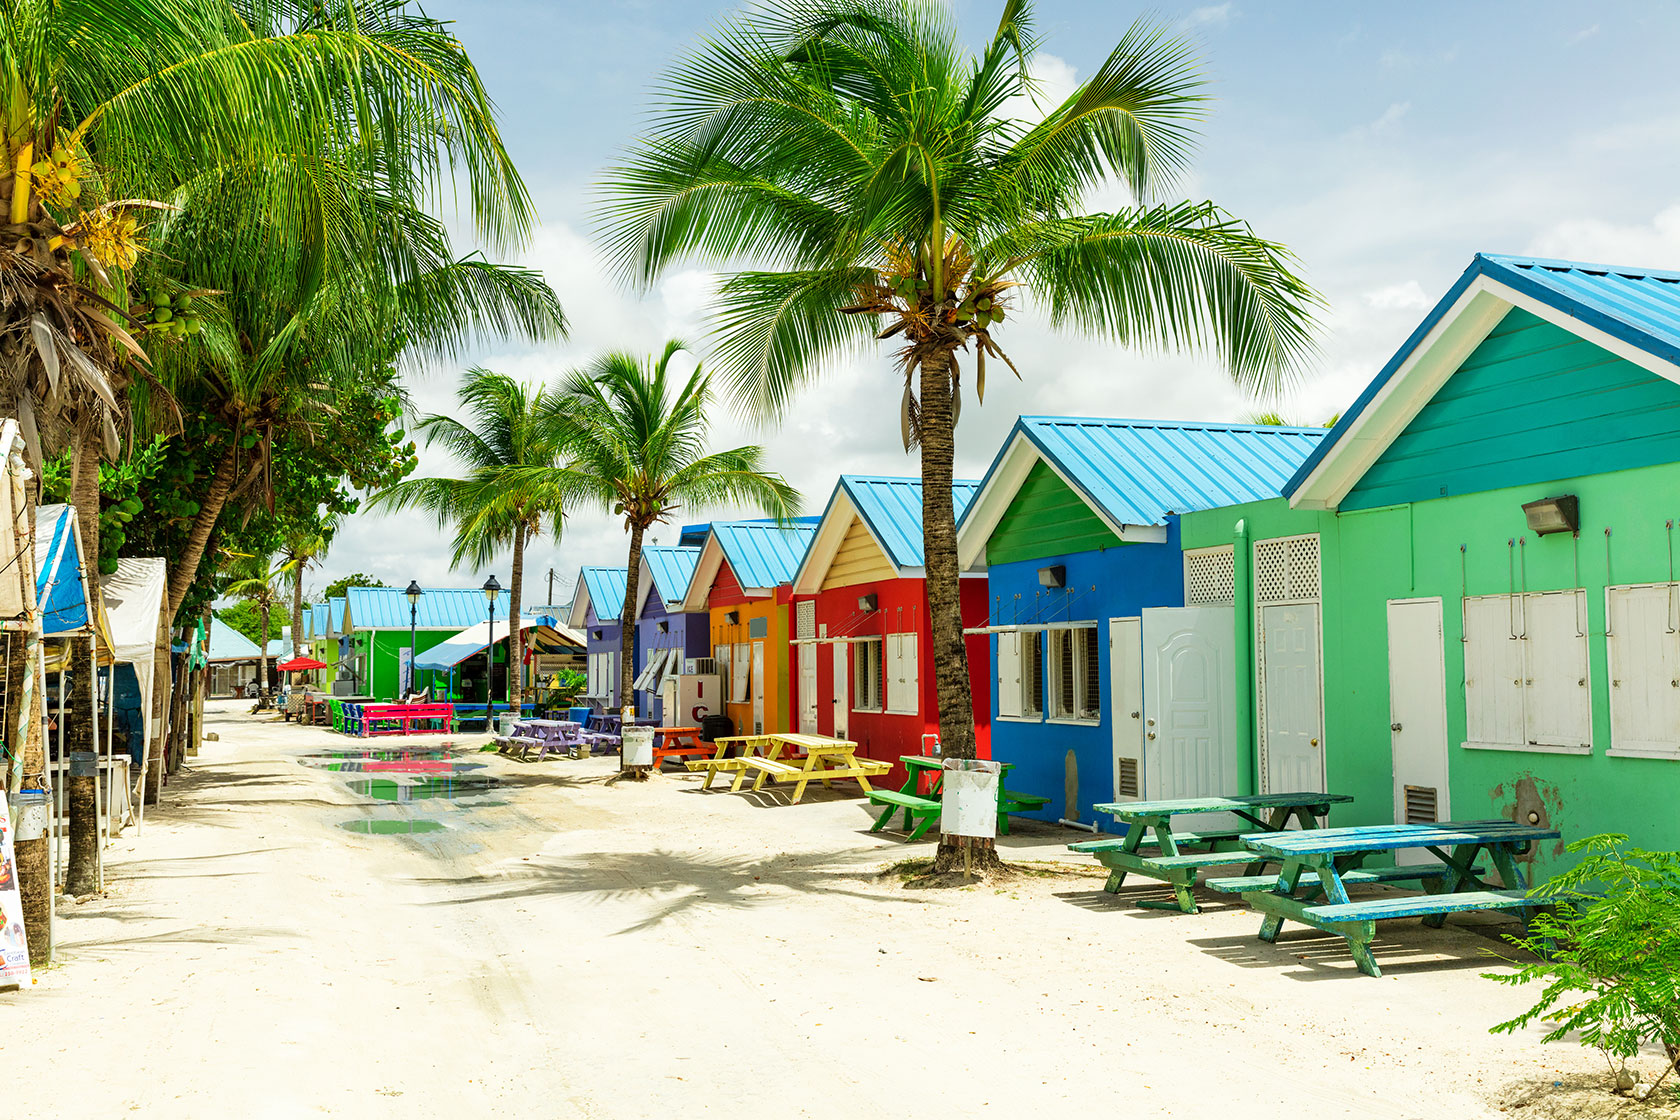 Colorful houses on the tropical island of Barbados in the Caribbean